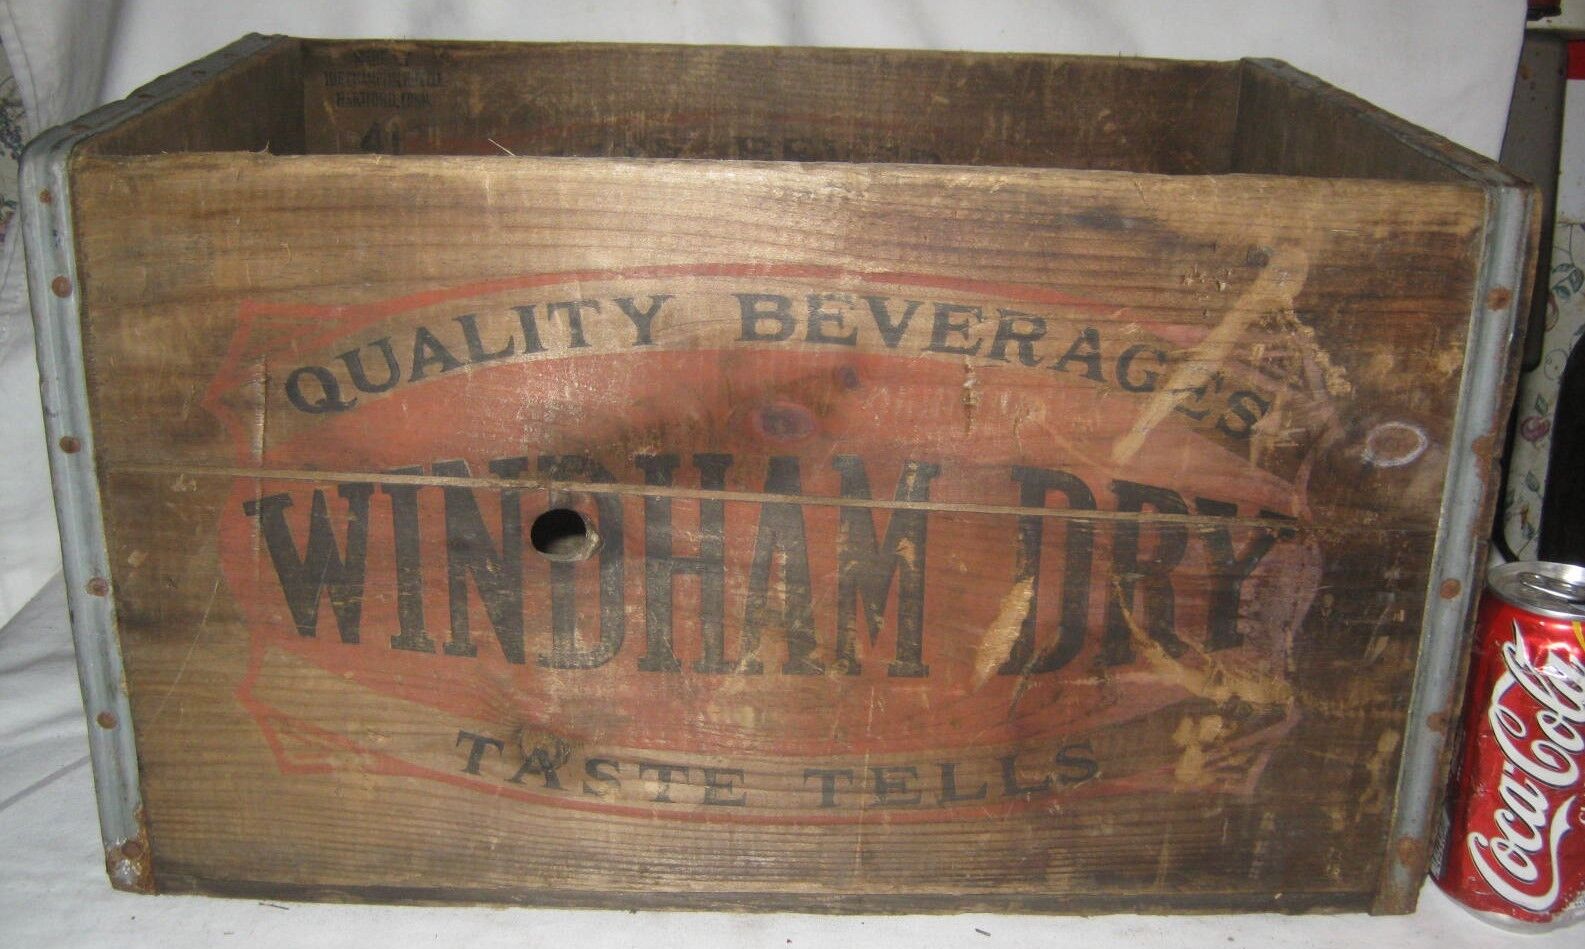 ANTIQUE WINDHAM DRY BEVERAGES CT USA WOOD BEER BOTTLE ART SIGN BOX CRATE CARRIER